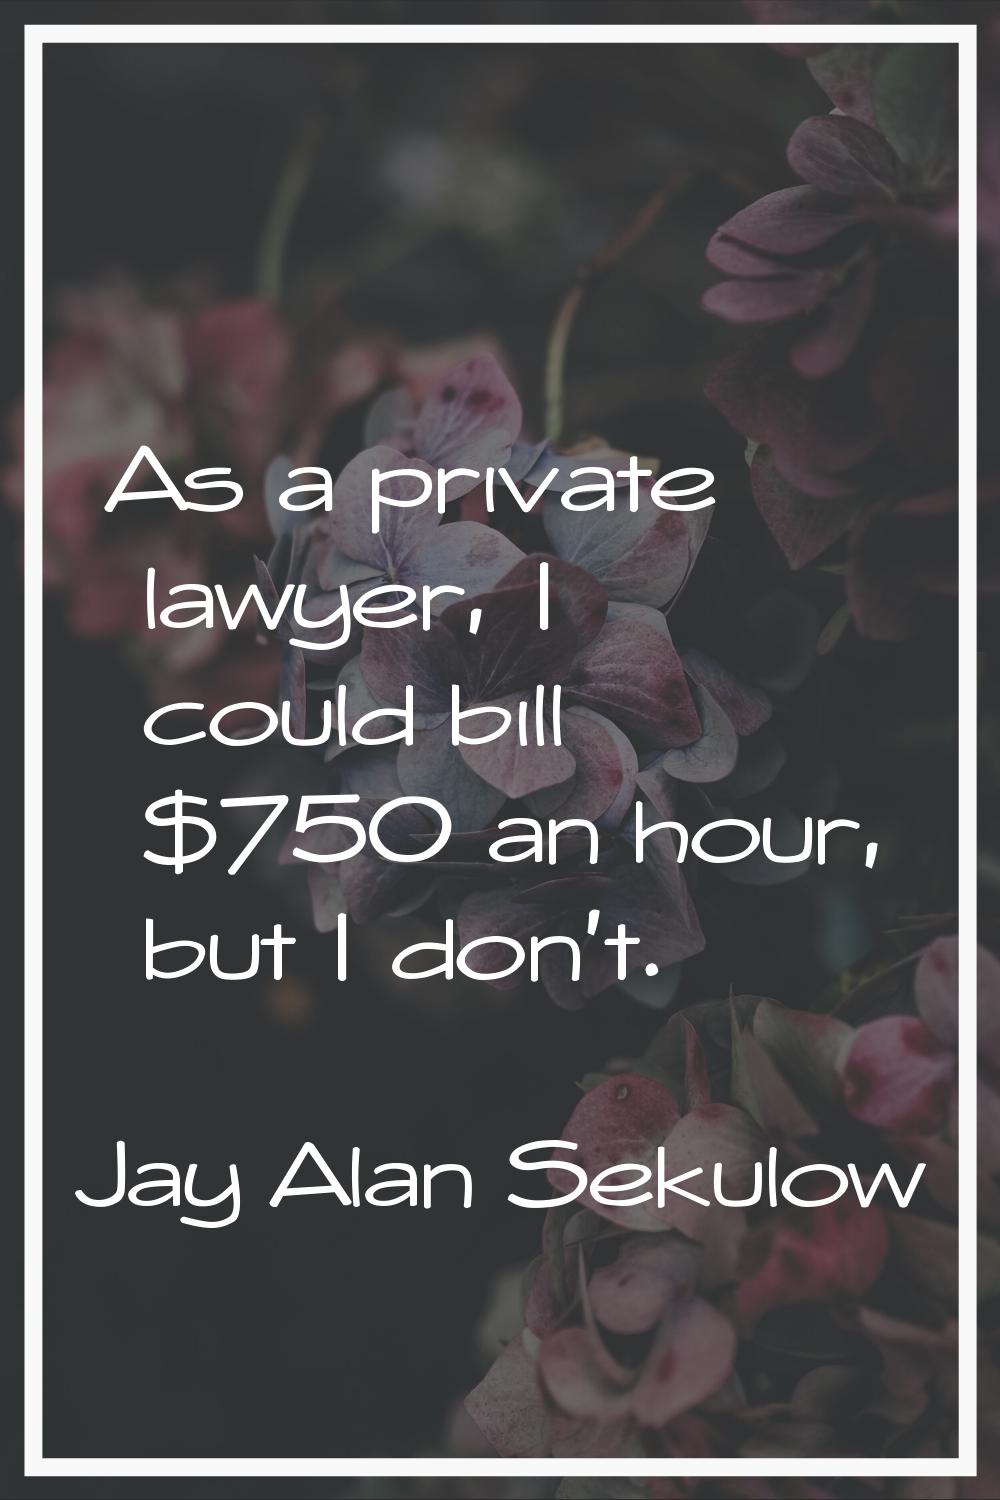 As a private lawyer, I could bill $750 an hour, but I don't.